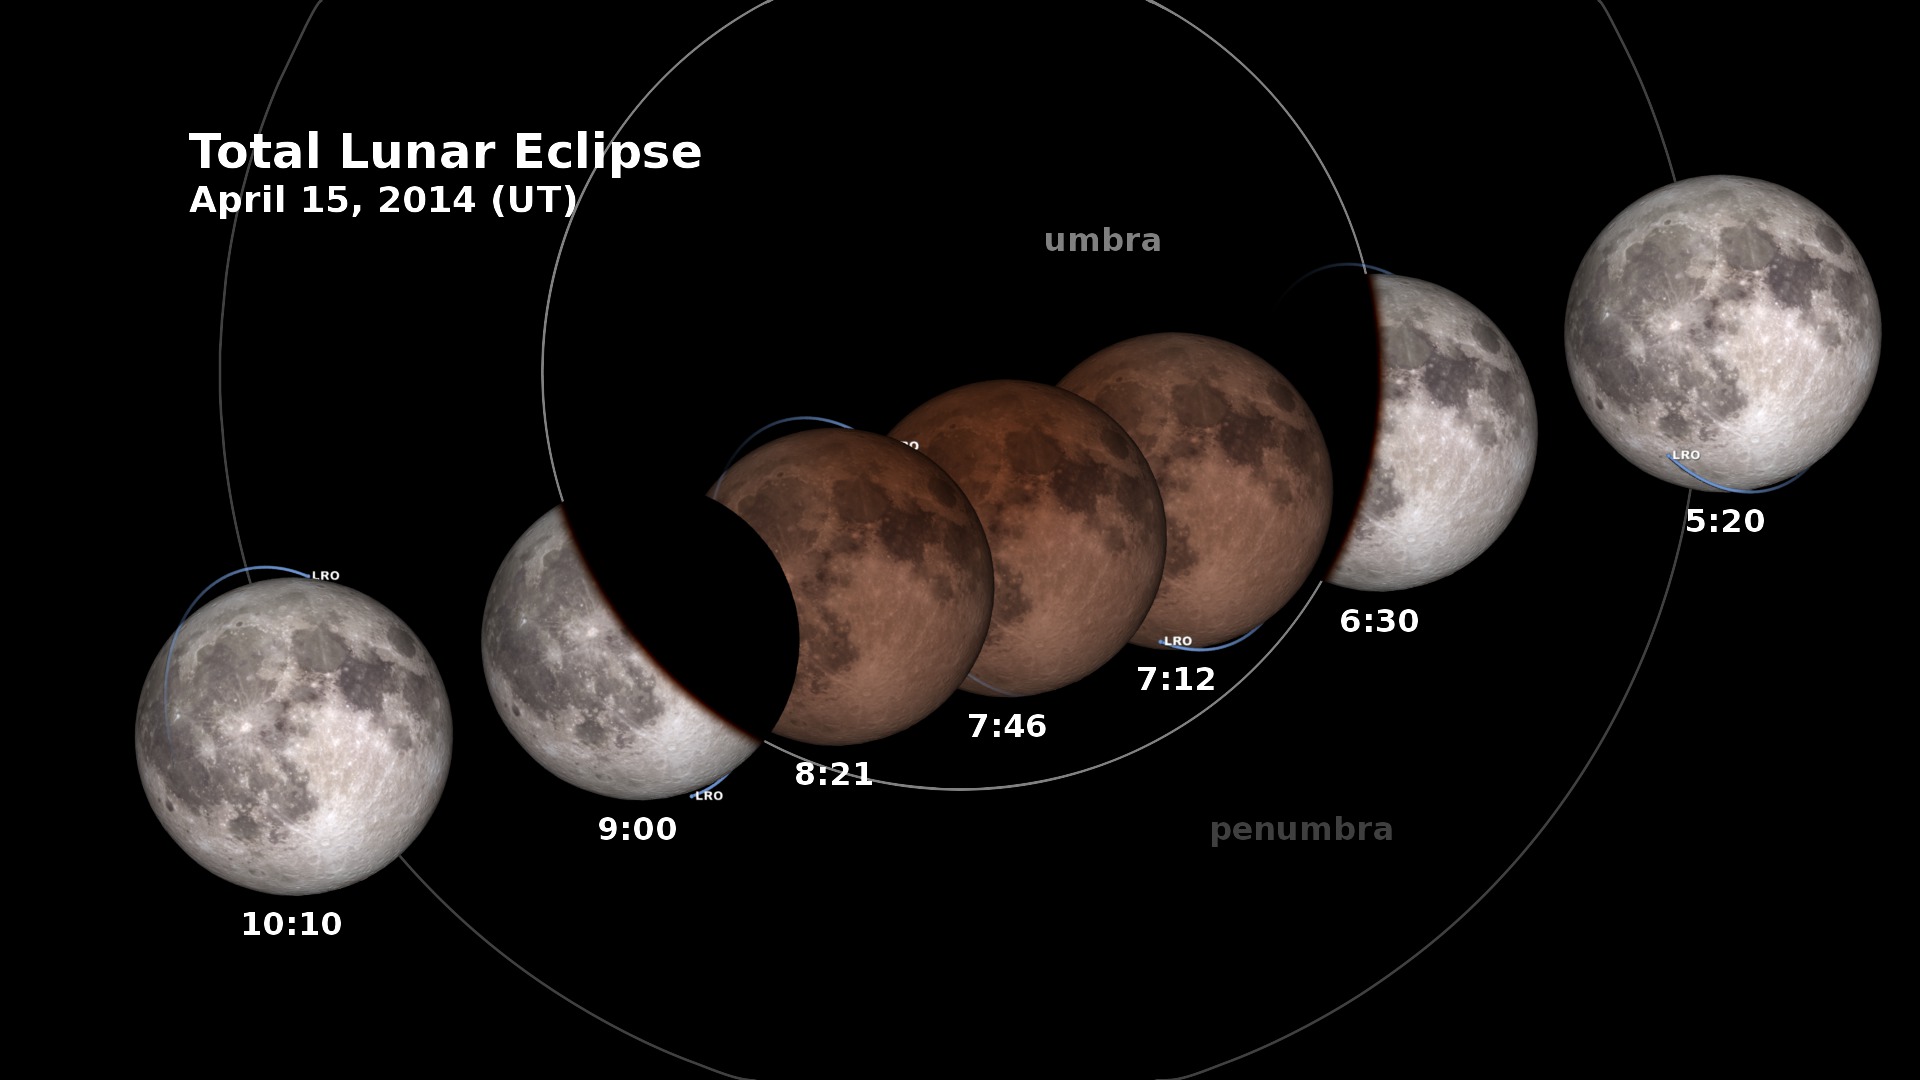 Preview Image for LRO and the Lunar Eclipse of April 15, 2014: Shadow View